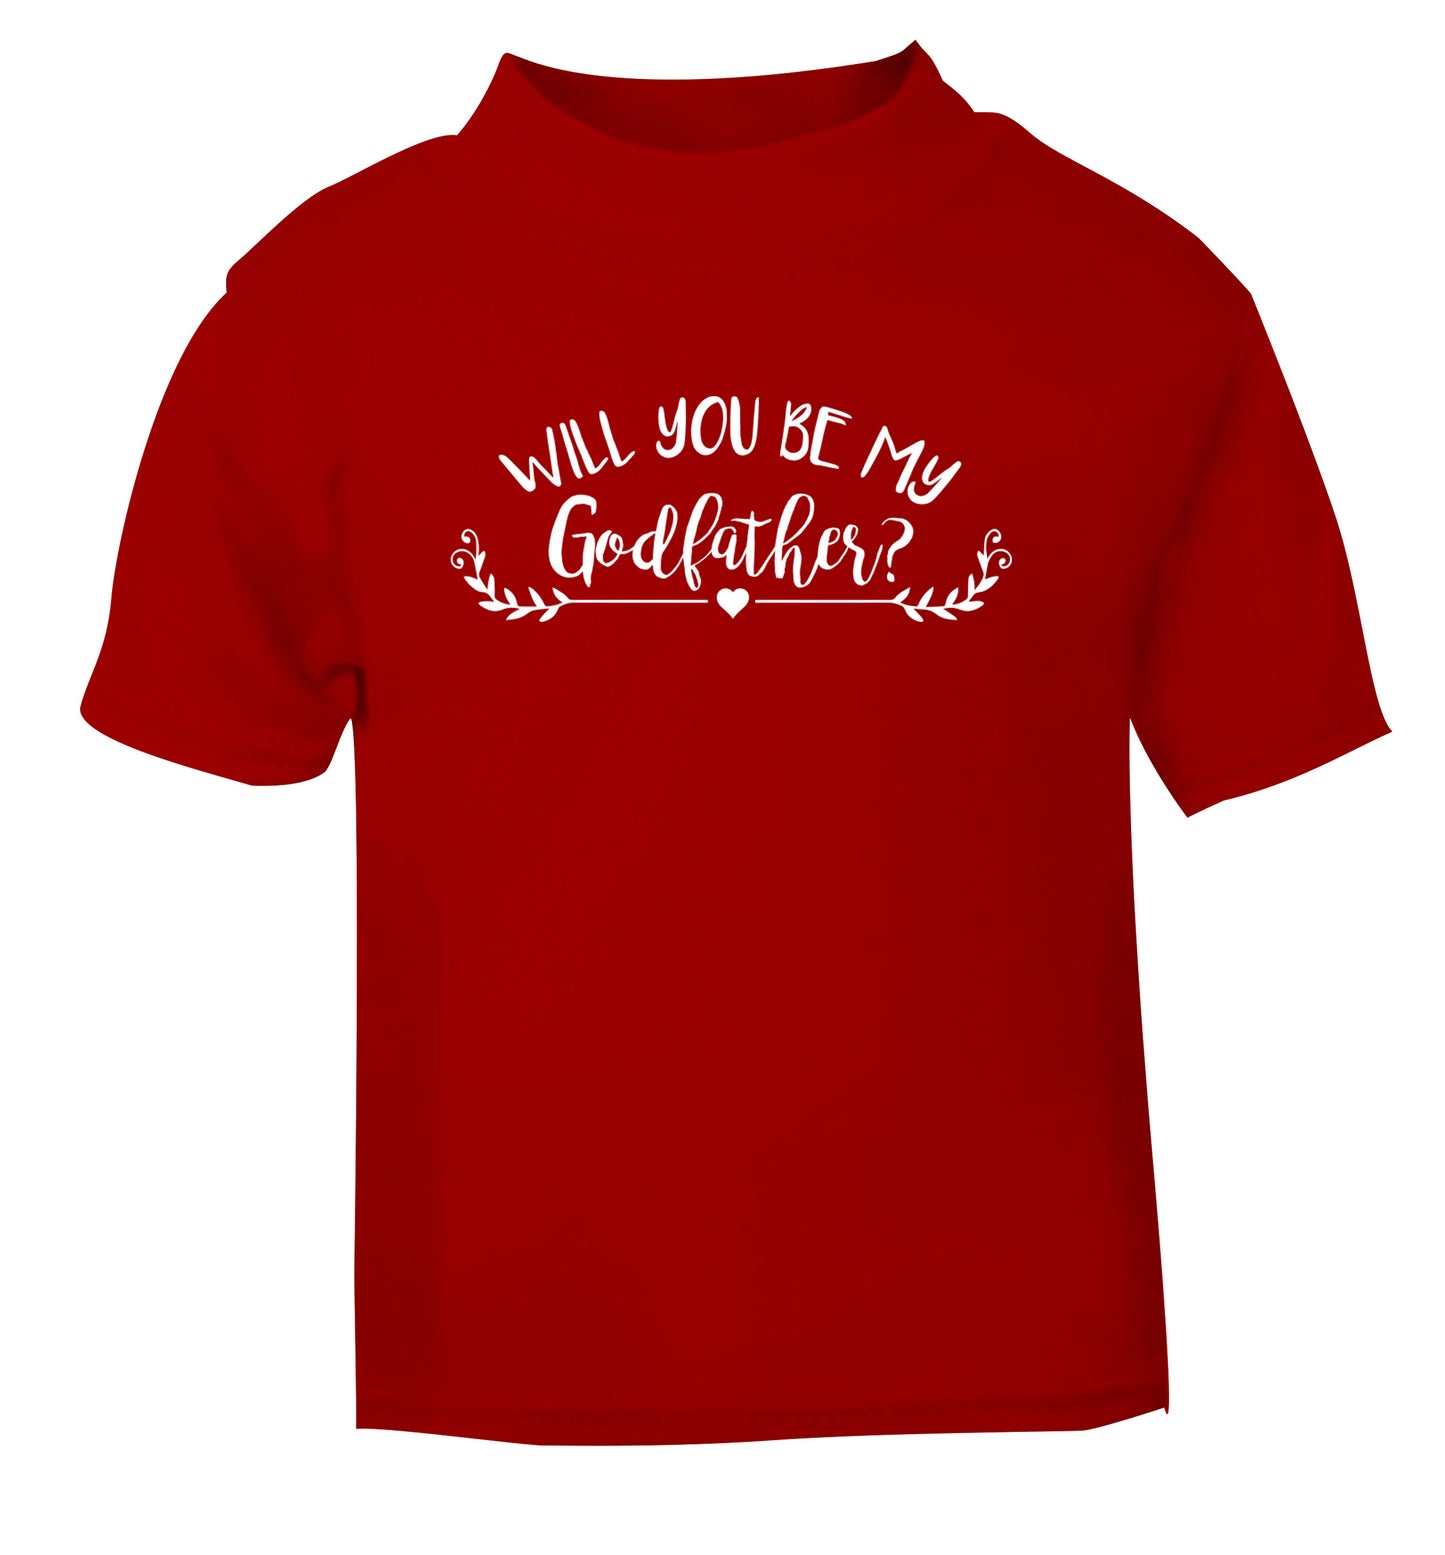 Will you be my godfather? red Baby Toddler Tshirt 2 Years